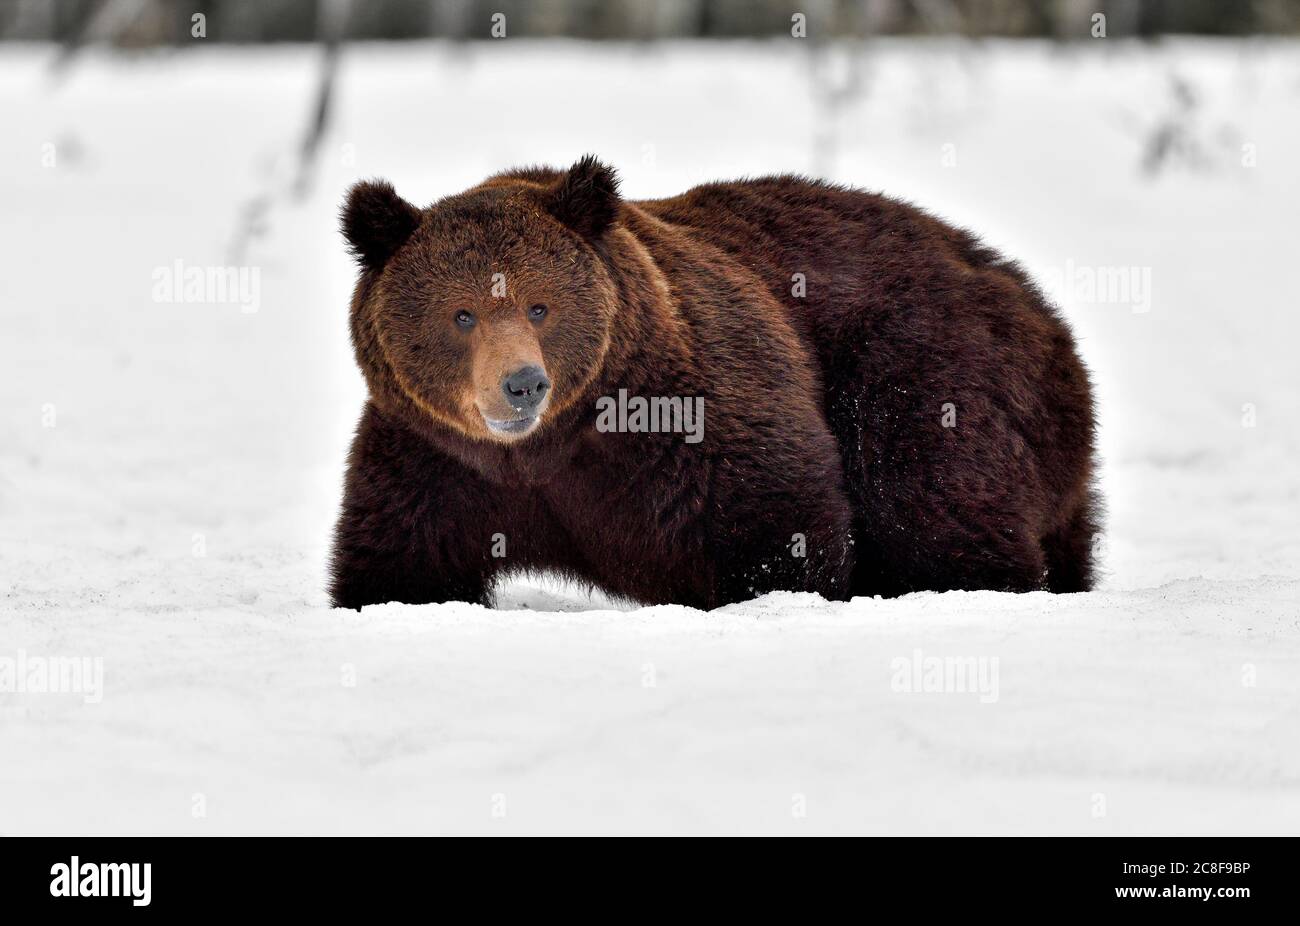 A brown bear is bogged down in deep snow. Stock Photo